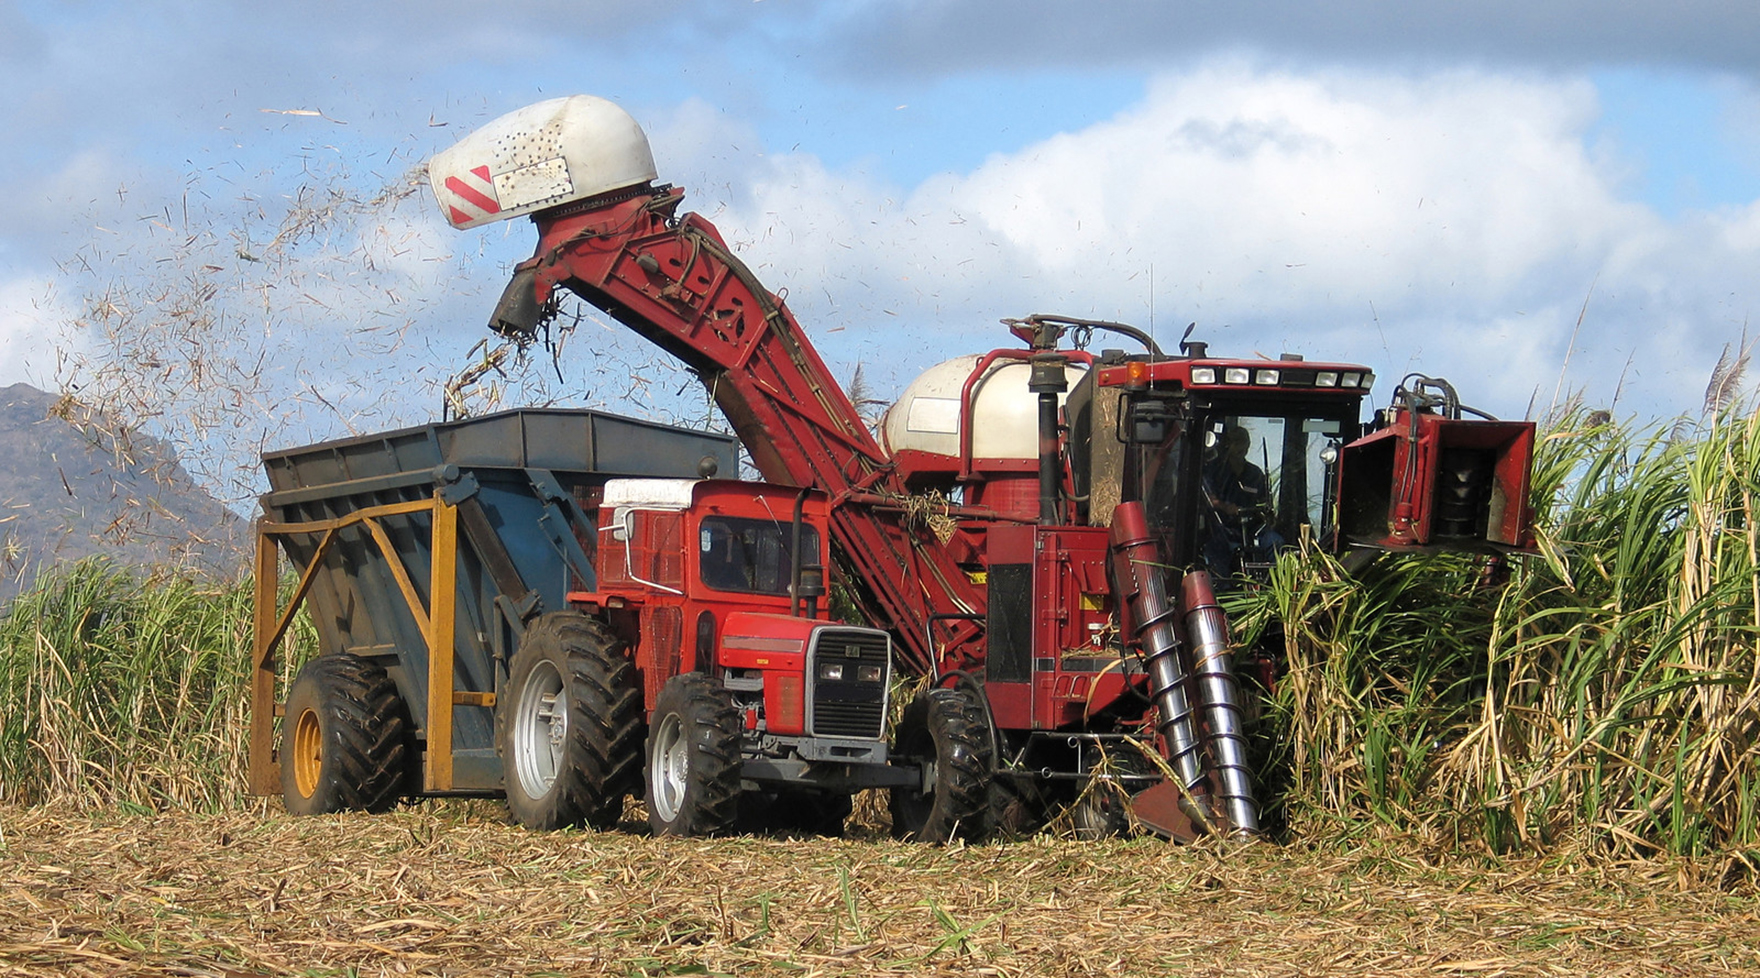 Spare-parts for Austoft Case IH Suger Cane Combines (Harvesters) and Massey Ferguson tractor spare parts.